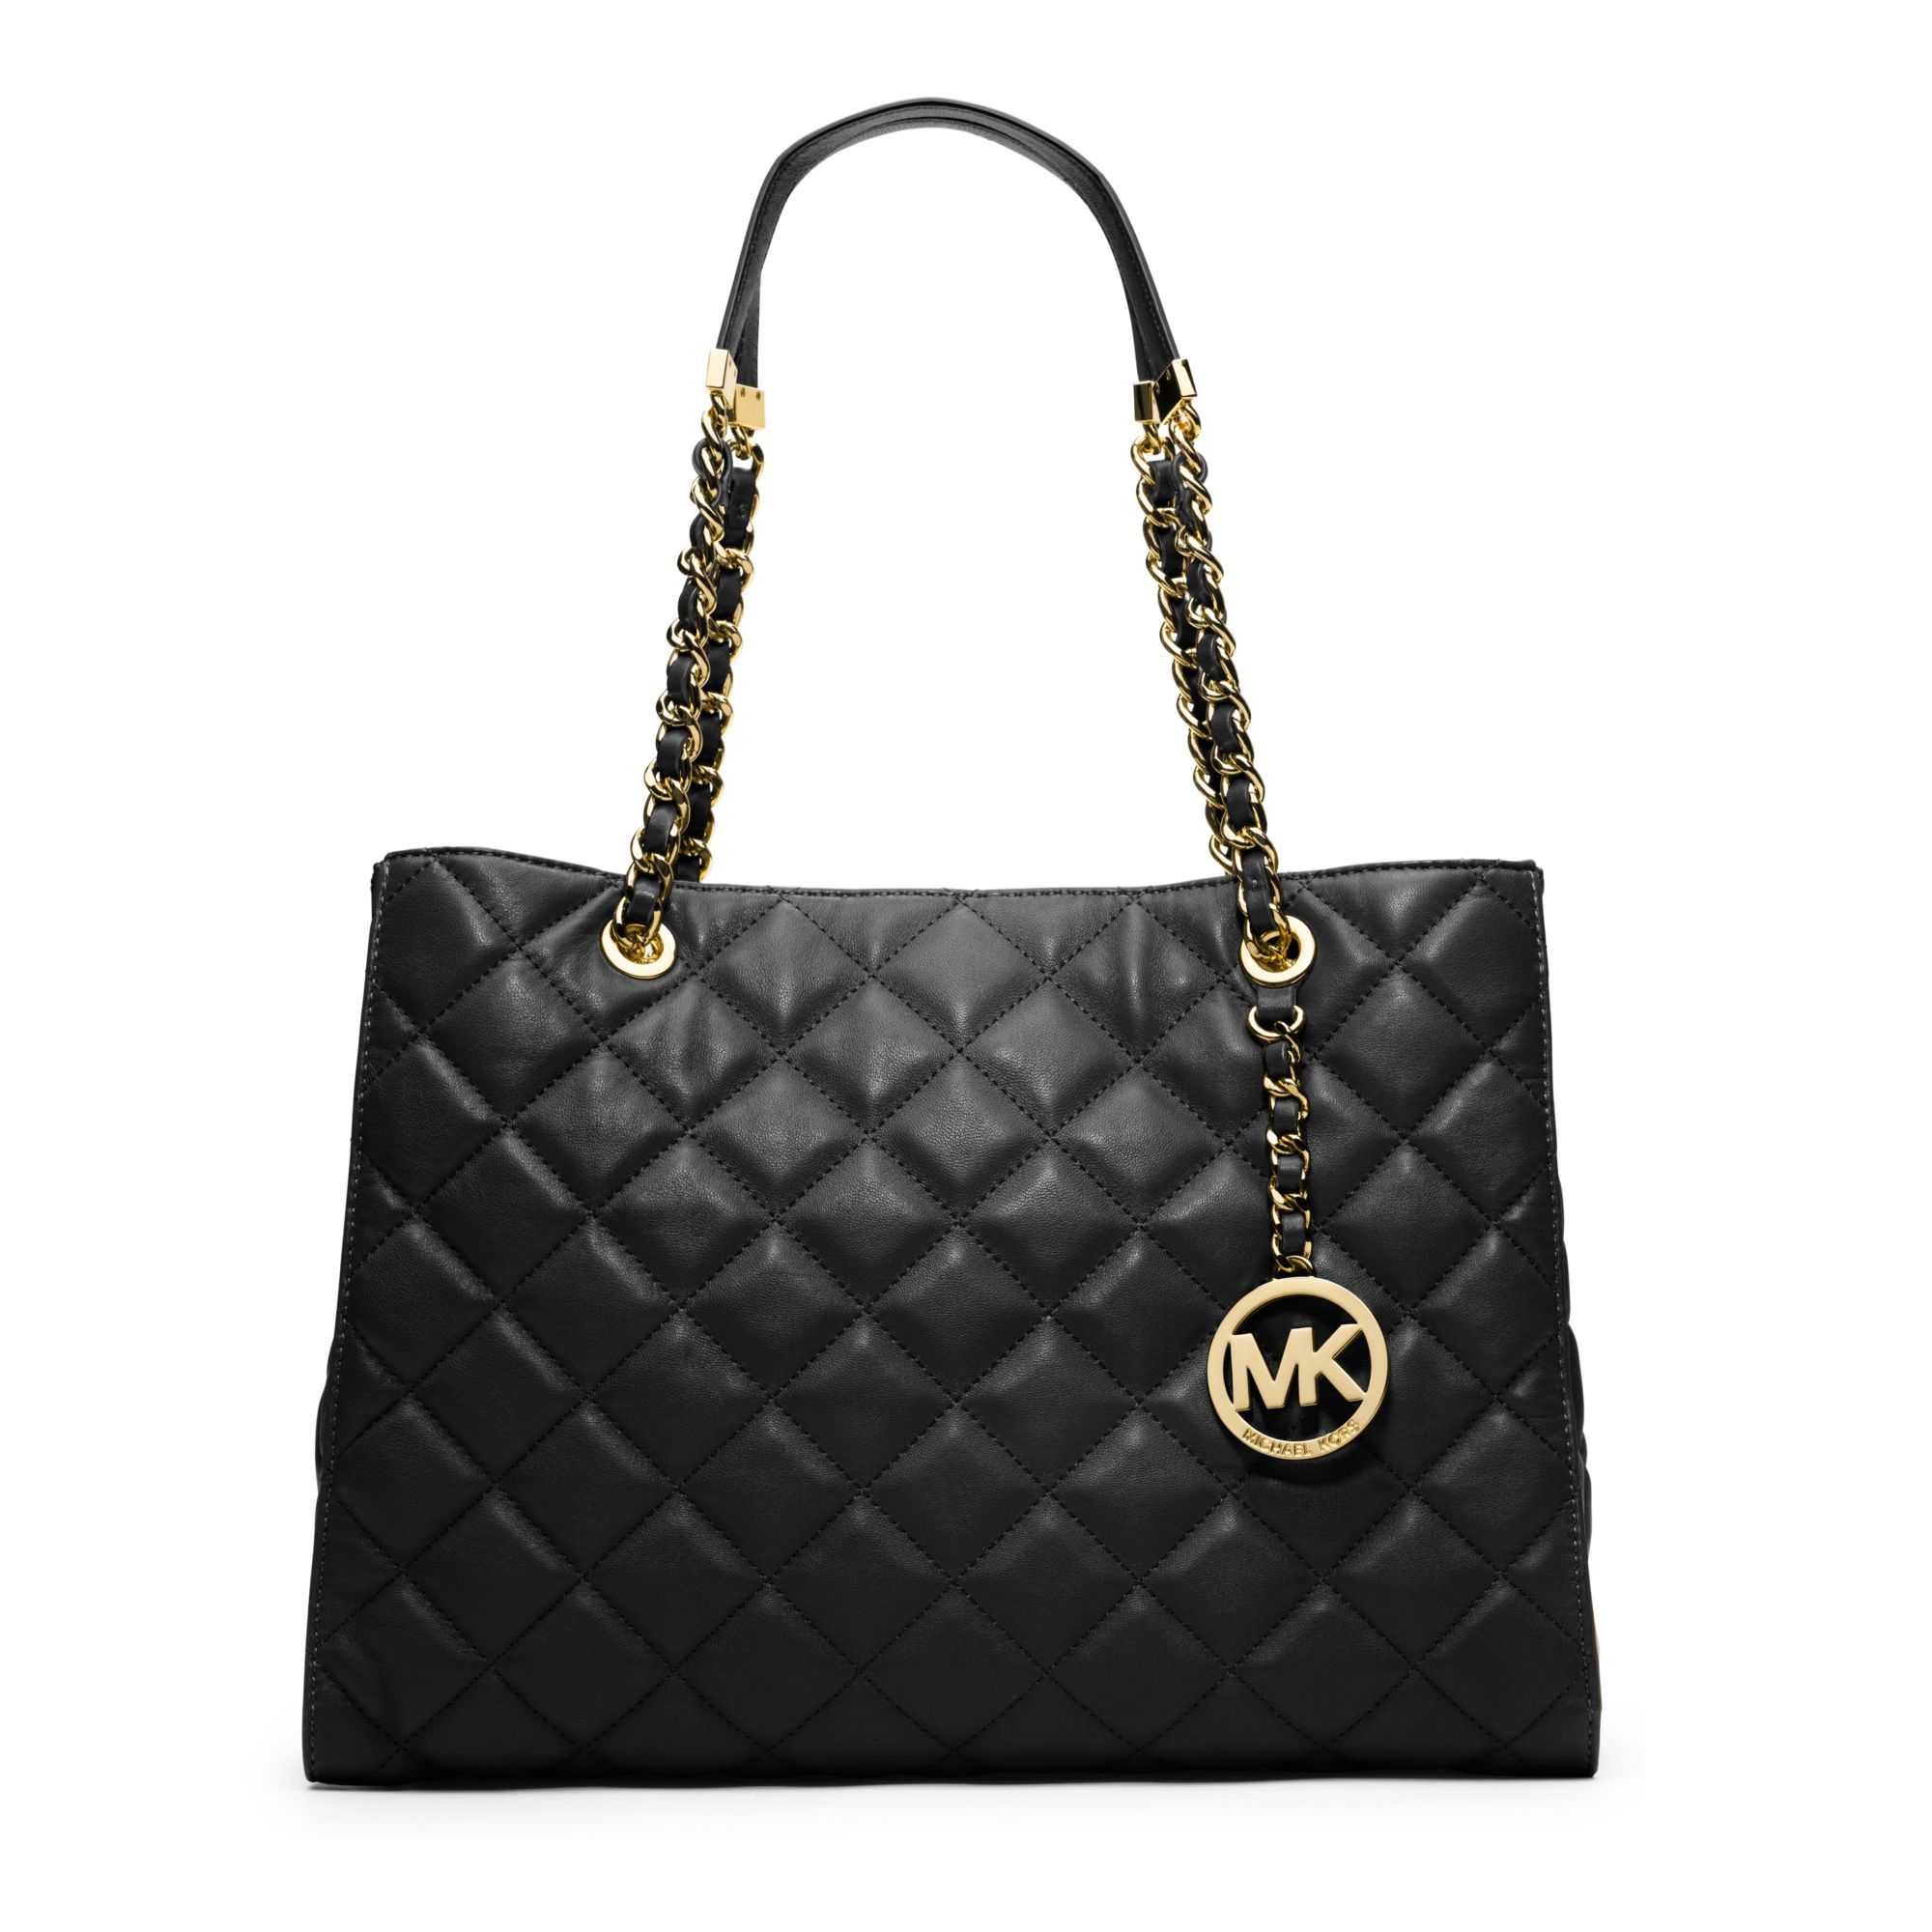 Michael Kors Susannah Quilted Leather Large Tote in Black - Lyst